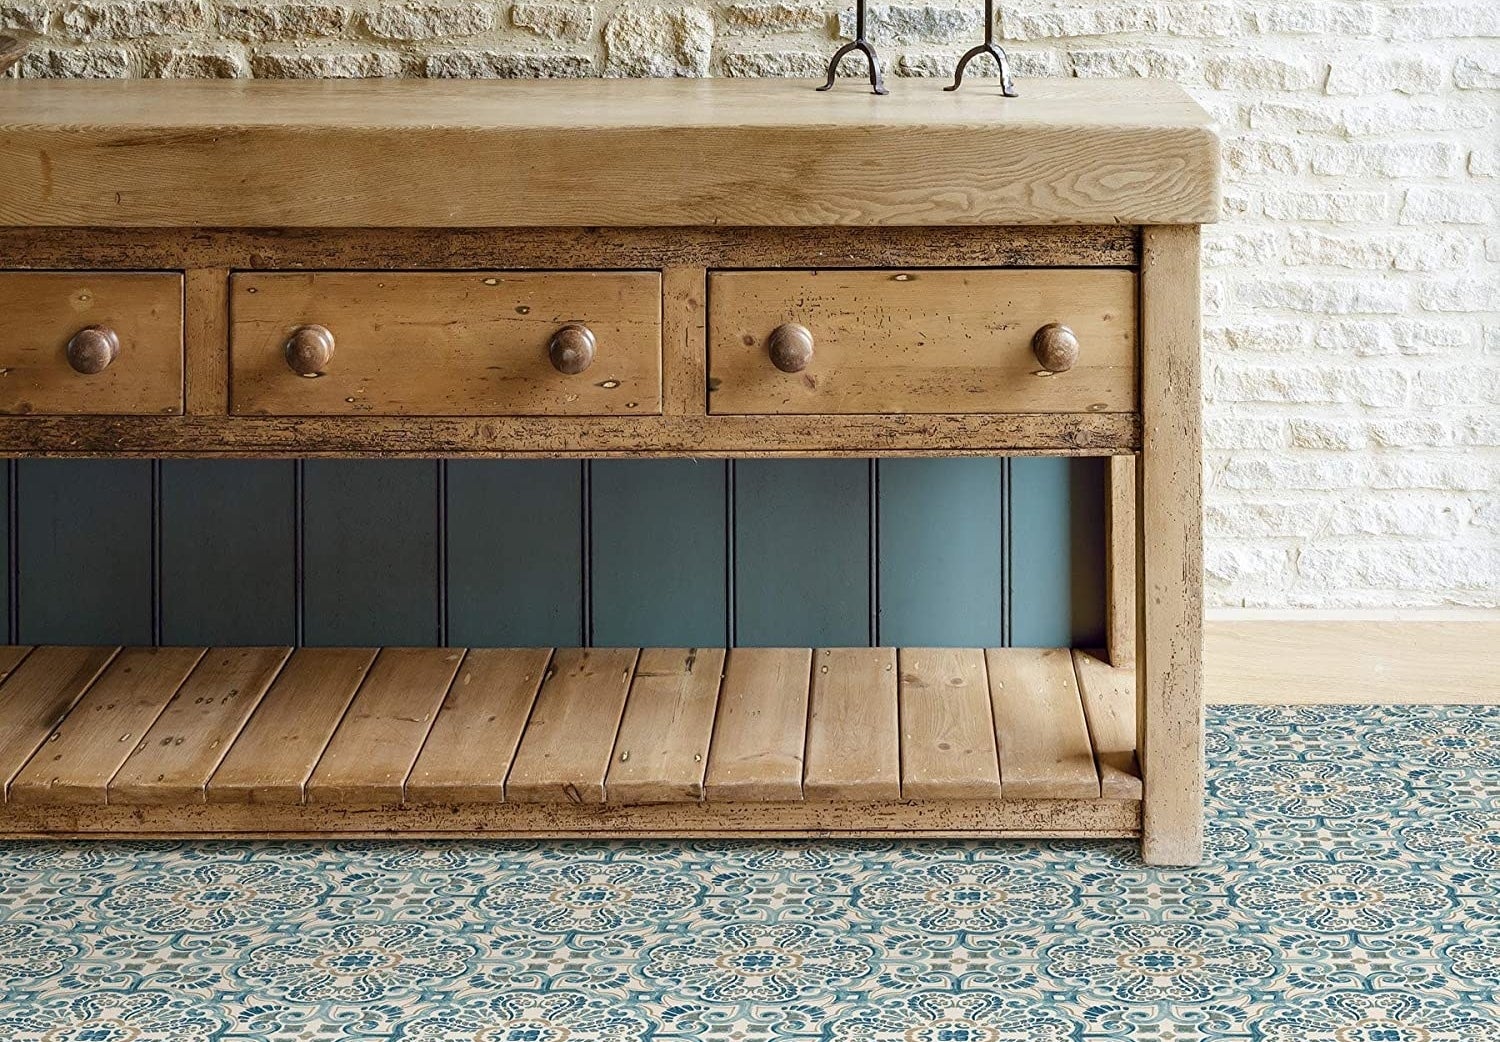 A wooden credenza on a funky patterned tiled floor